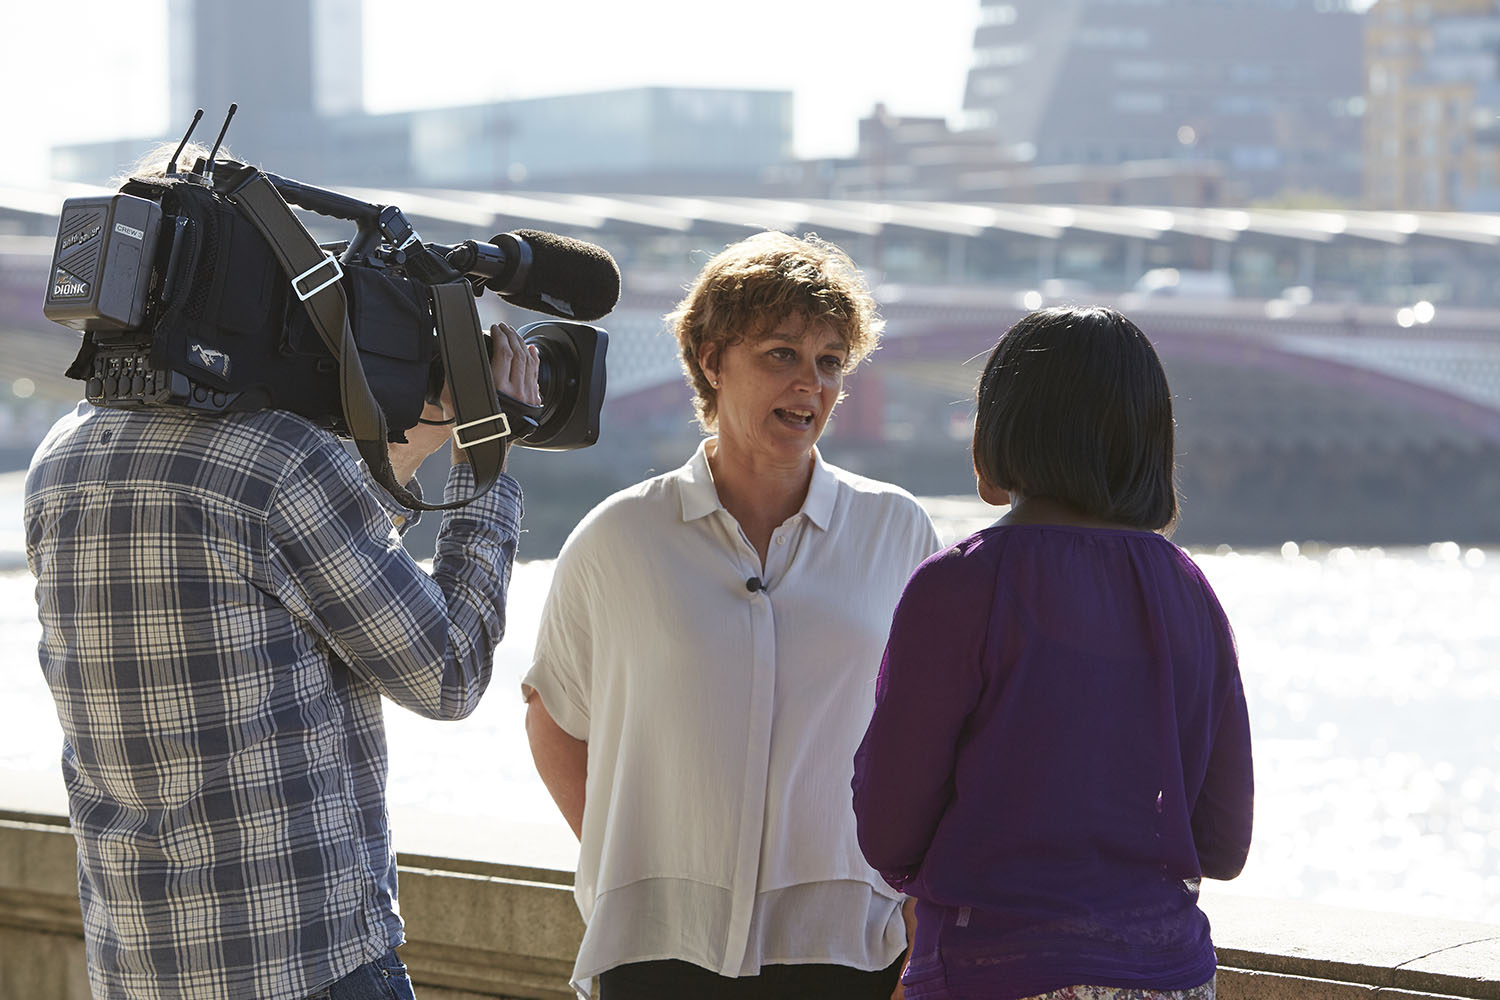 Artichoke's Director, Helen Marriage wearing a white shirt and being interviewed on camera by a woman with dark hair in a purple top